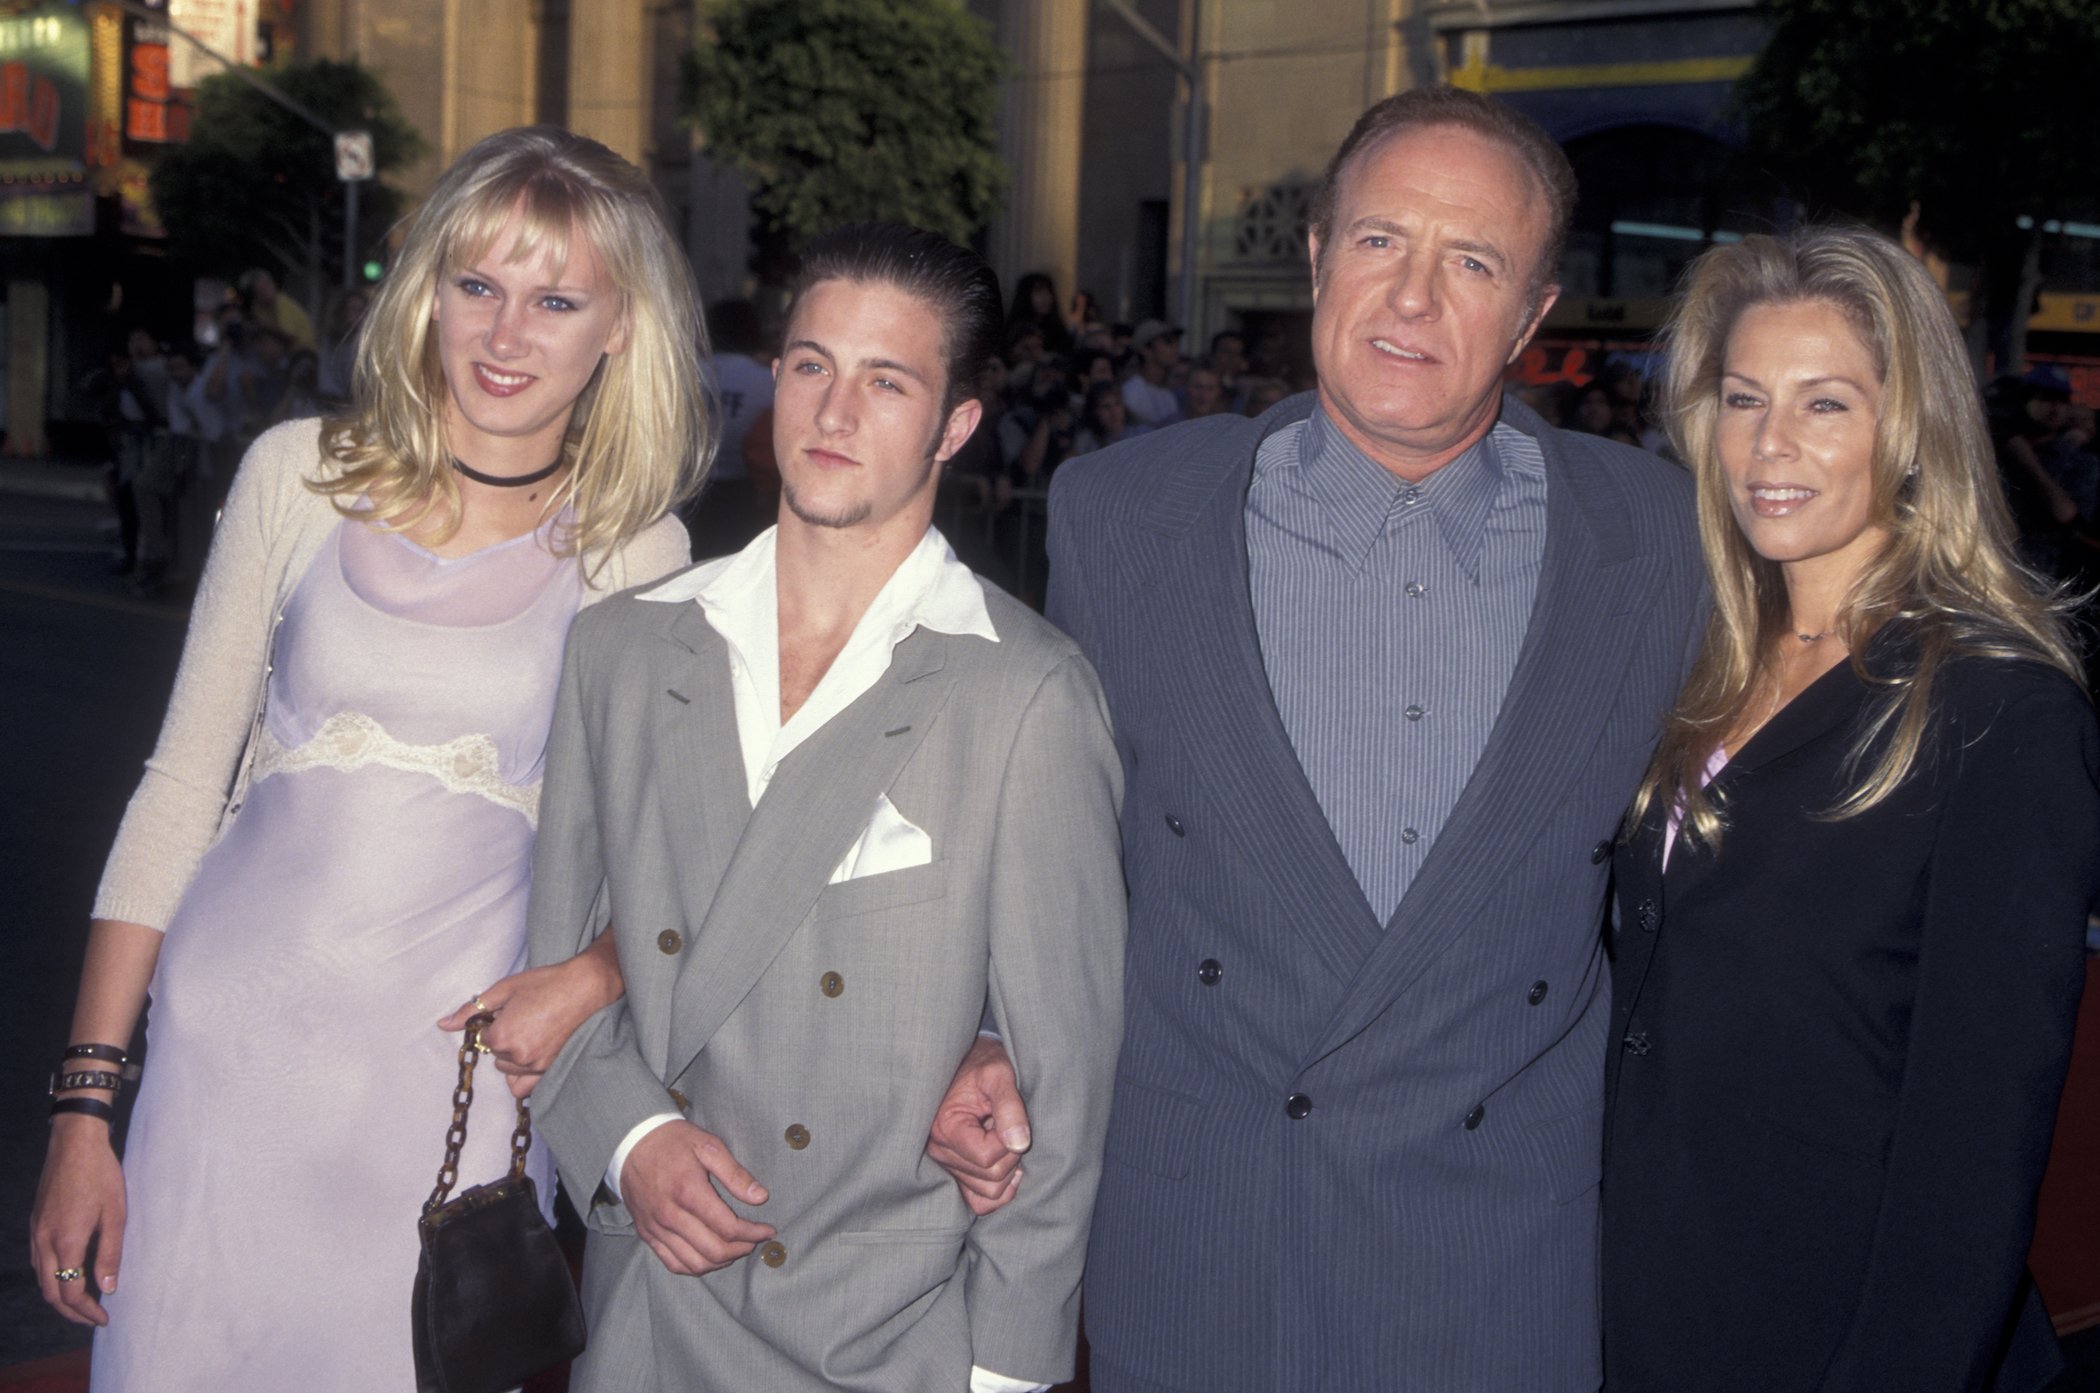 James Caan, Linda Stokes, and Scott Caan attend a premiere 